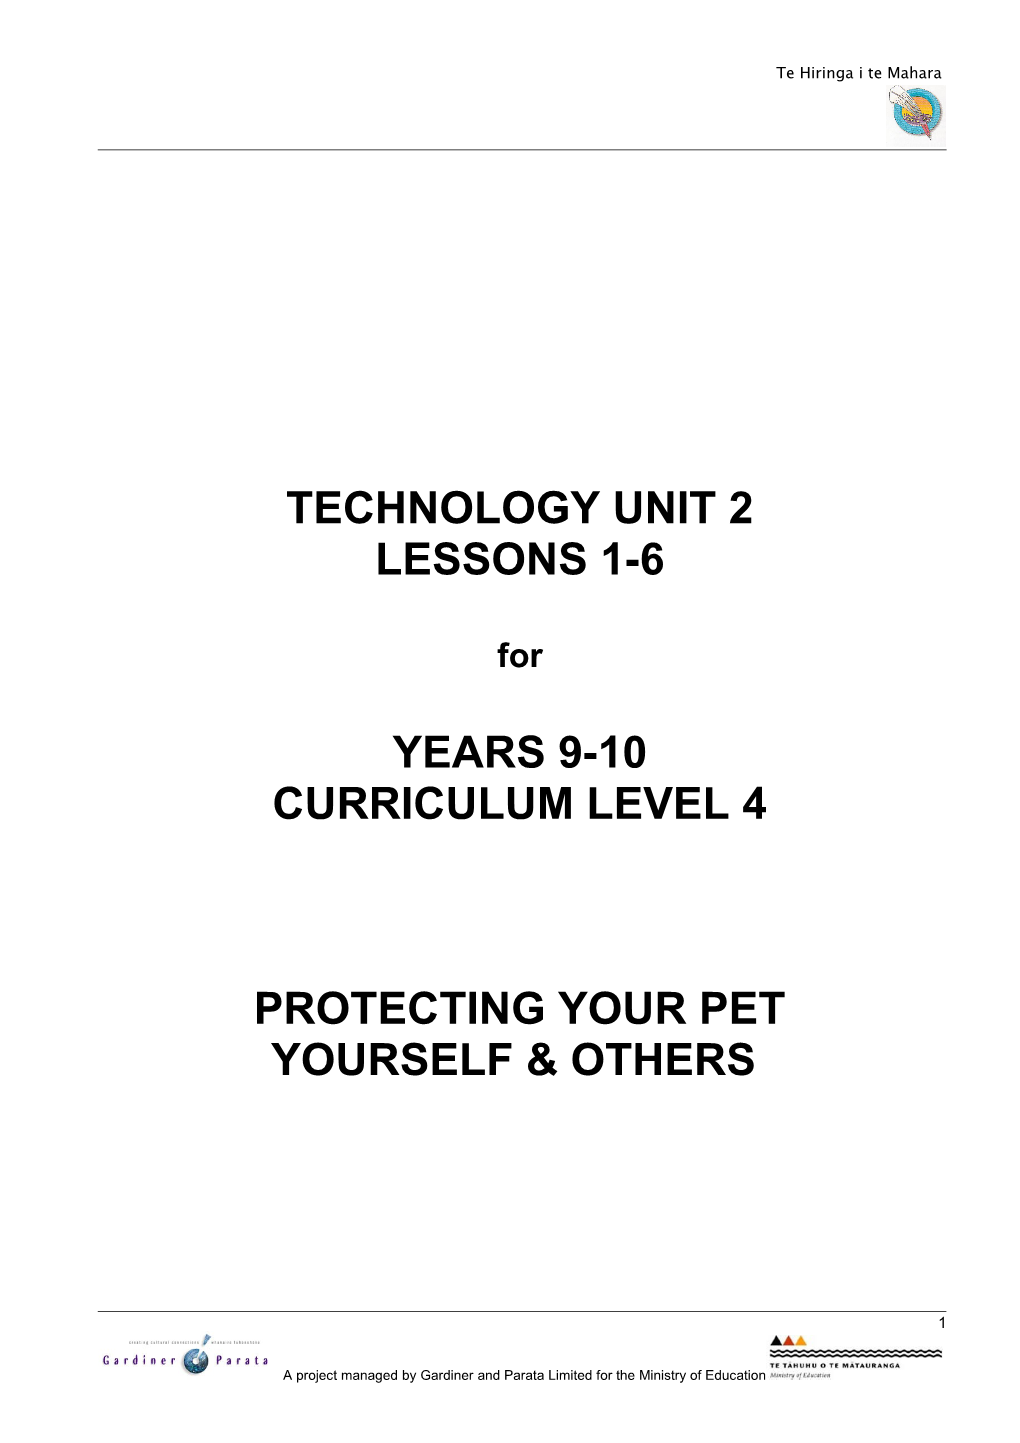 Context for Learning Protecting Your Pet, Yourself and Others